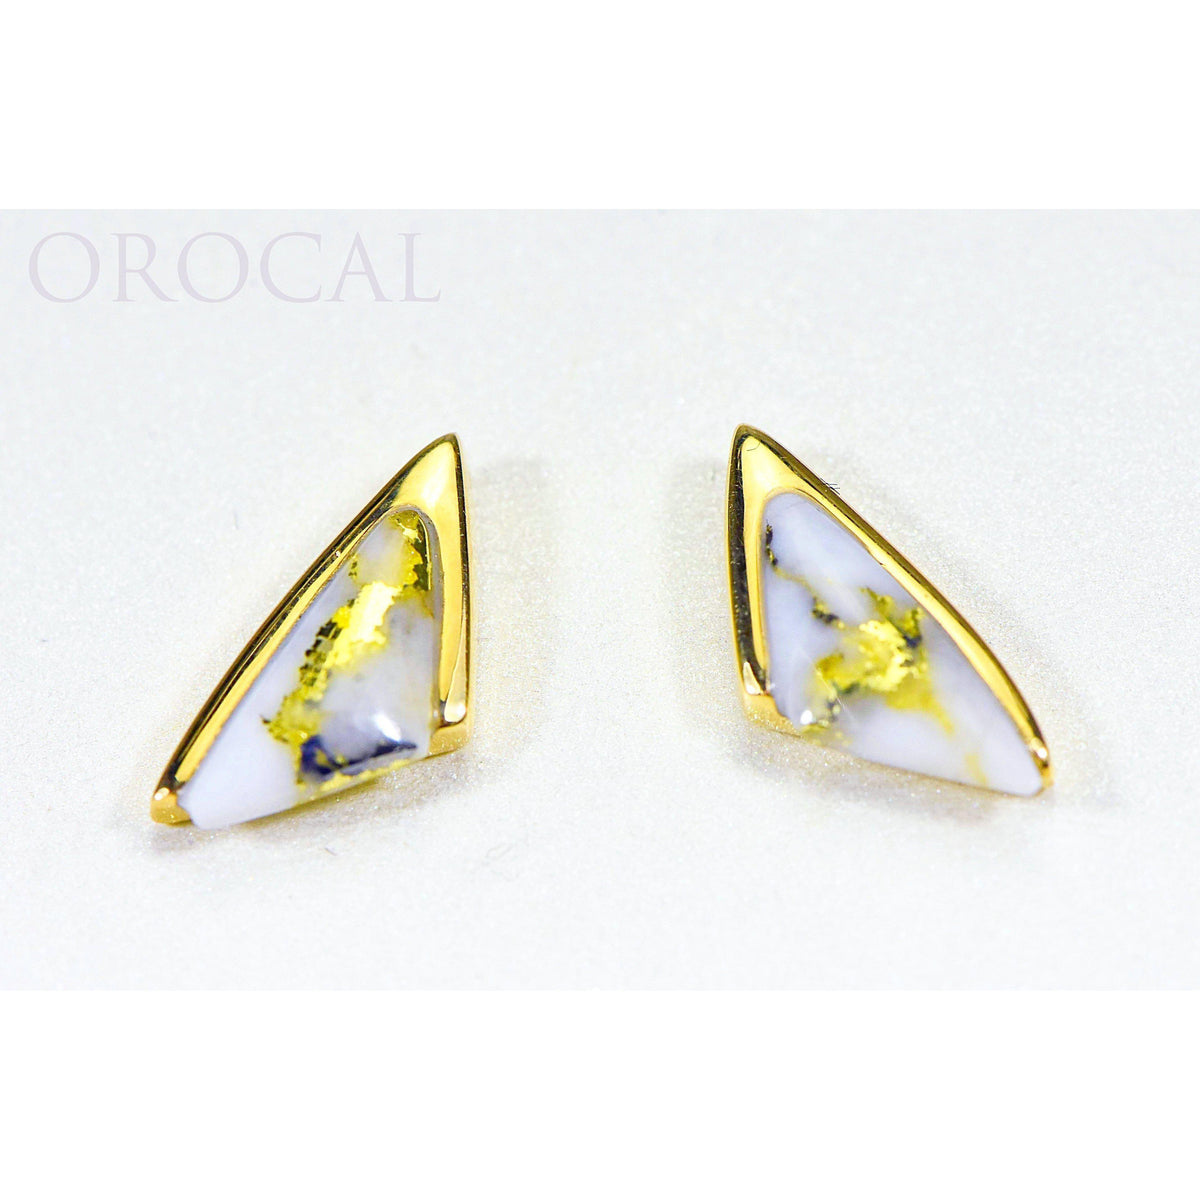 14K Gold Yellow Gold Casting Gold Quartz Earrings Orocal EBZ4MMQ Genuine Hand Crafted Jewelry